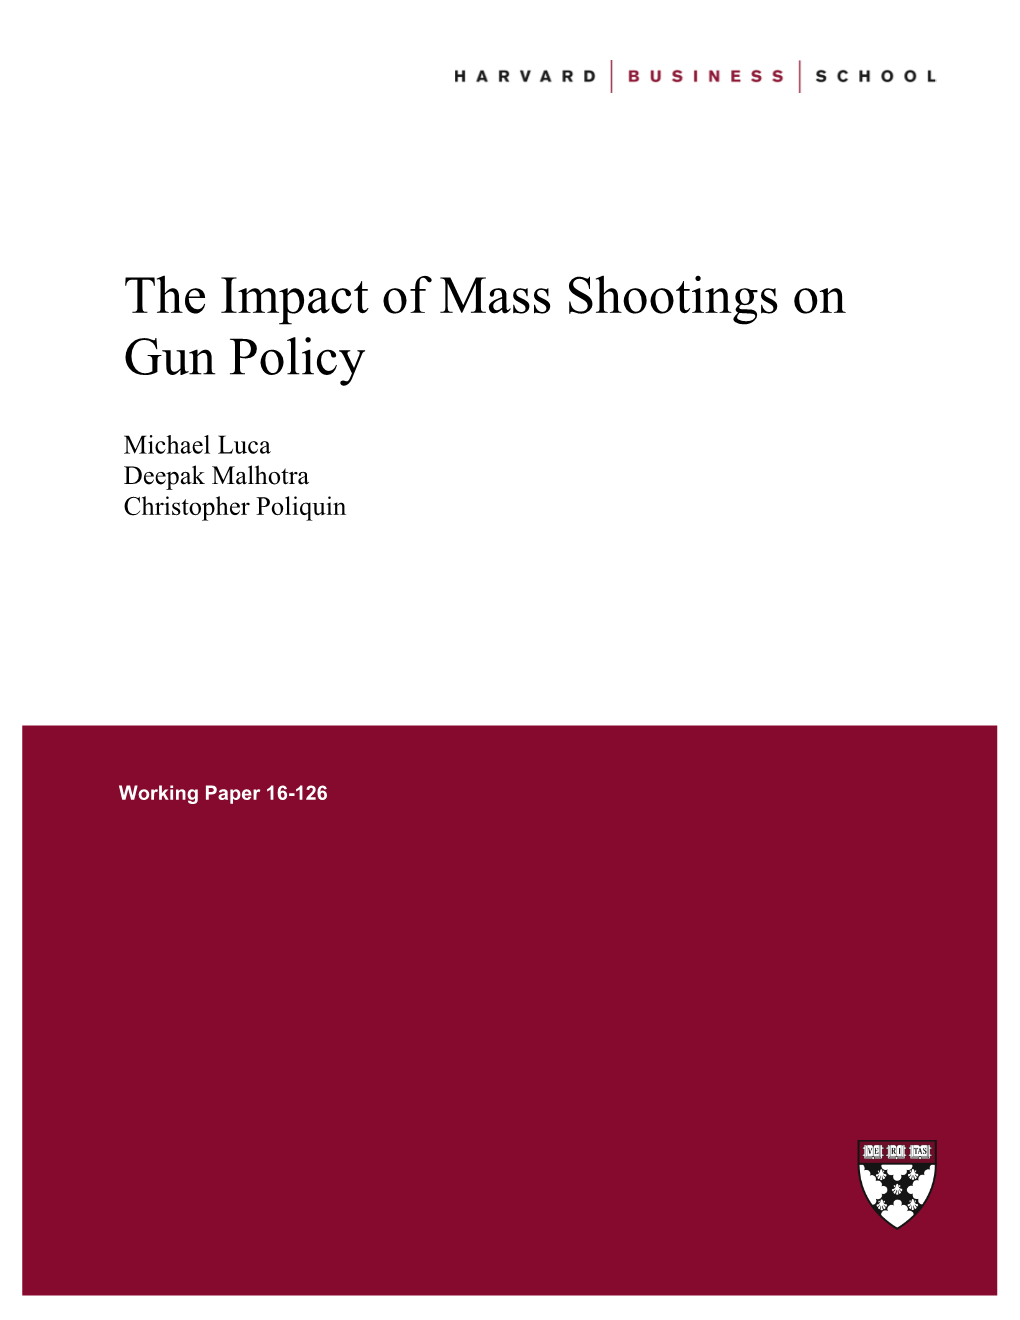 The Impact of Mass Shootings on Gun Policy